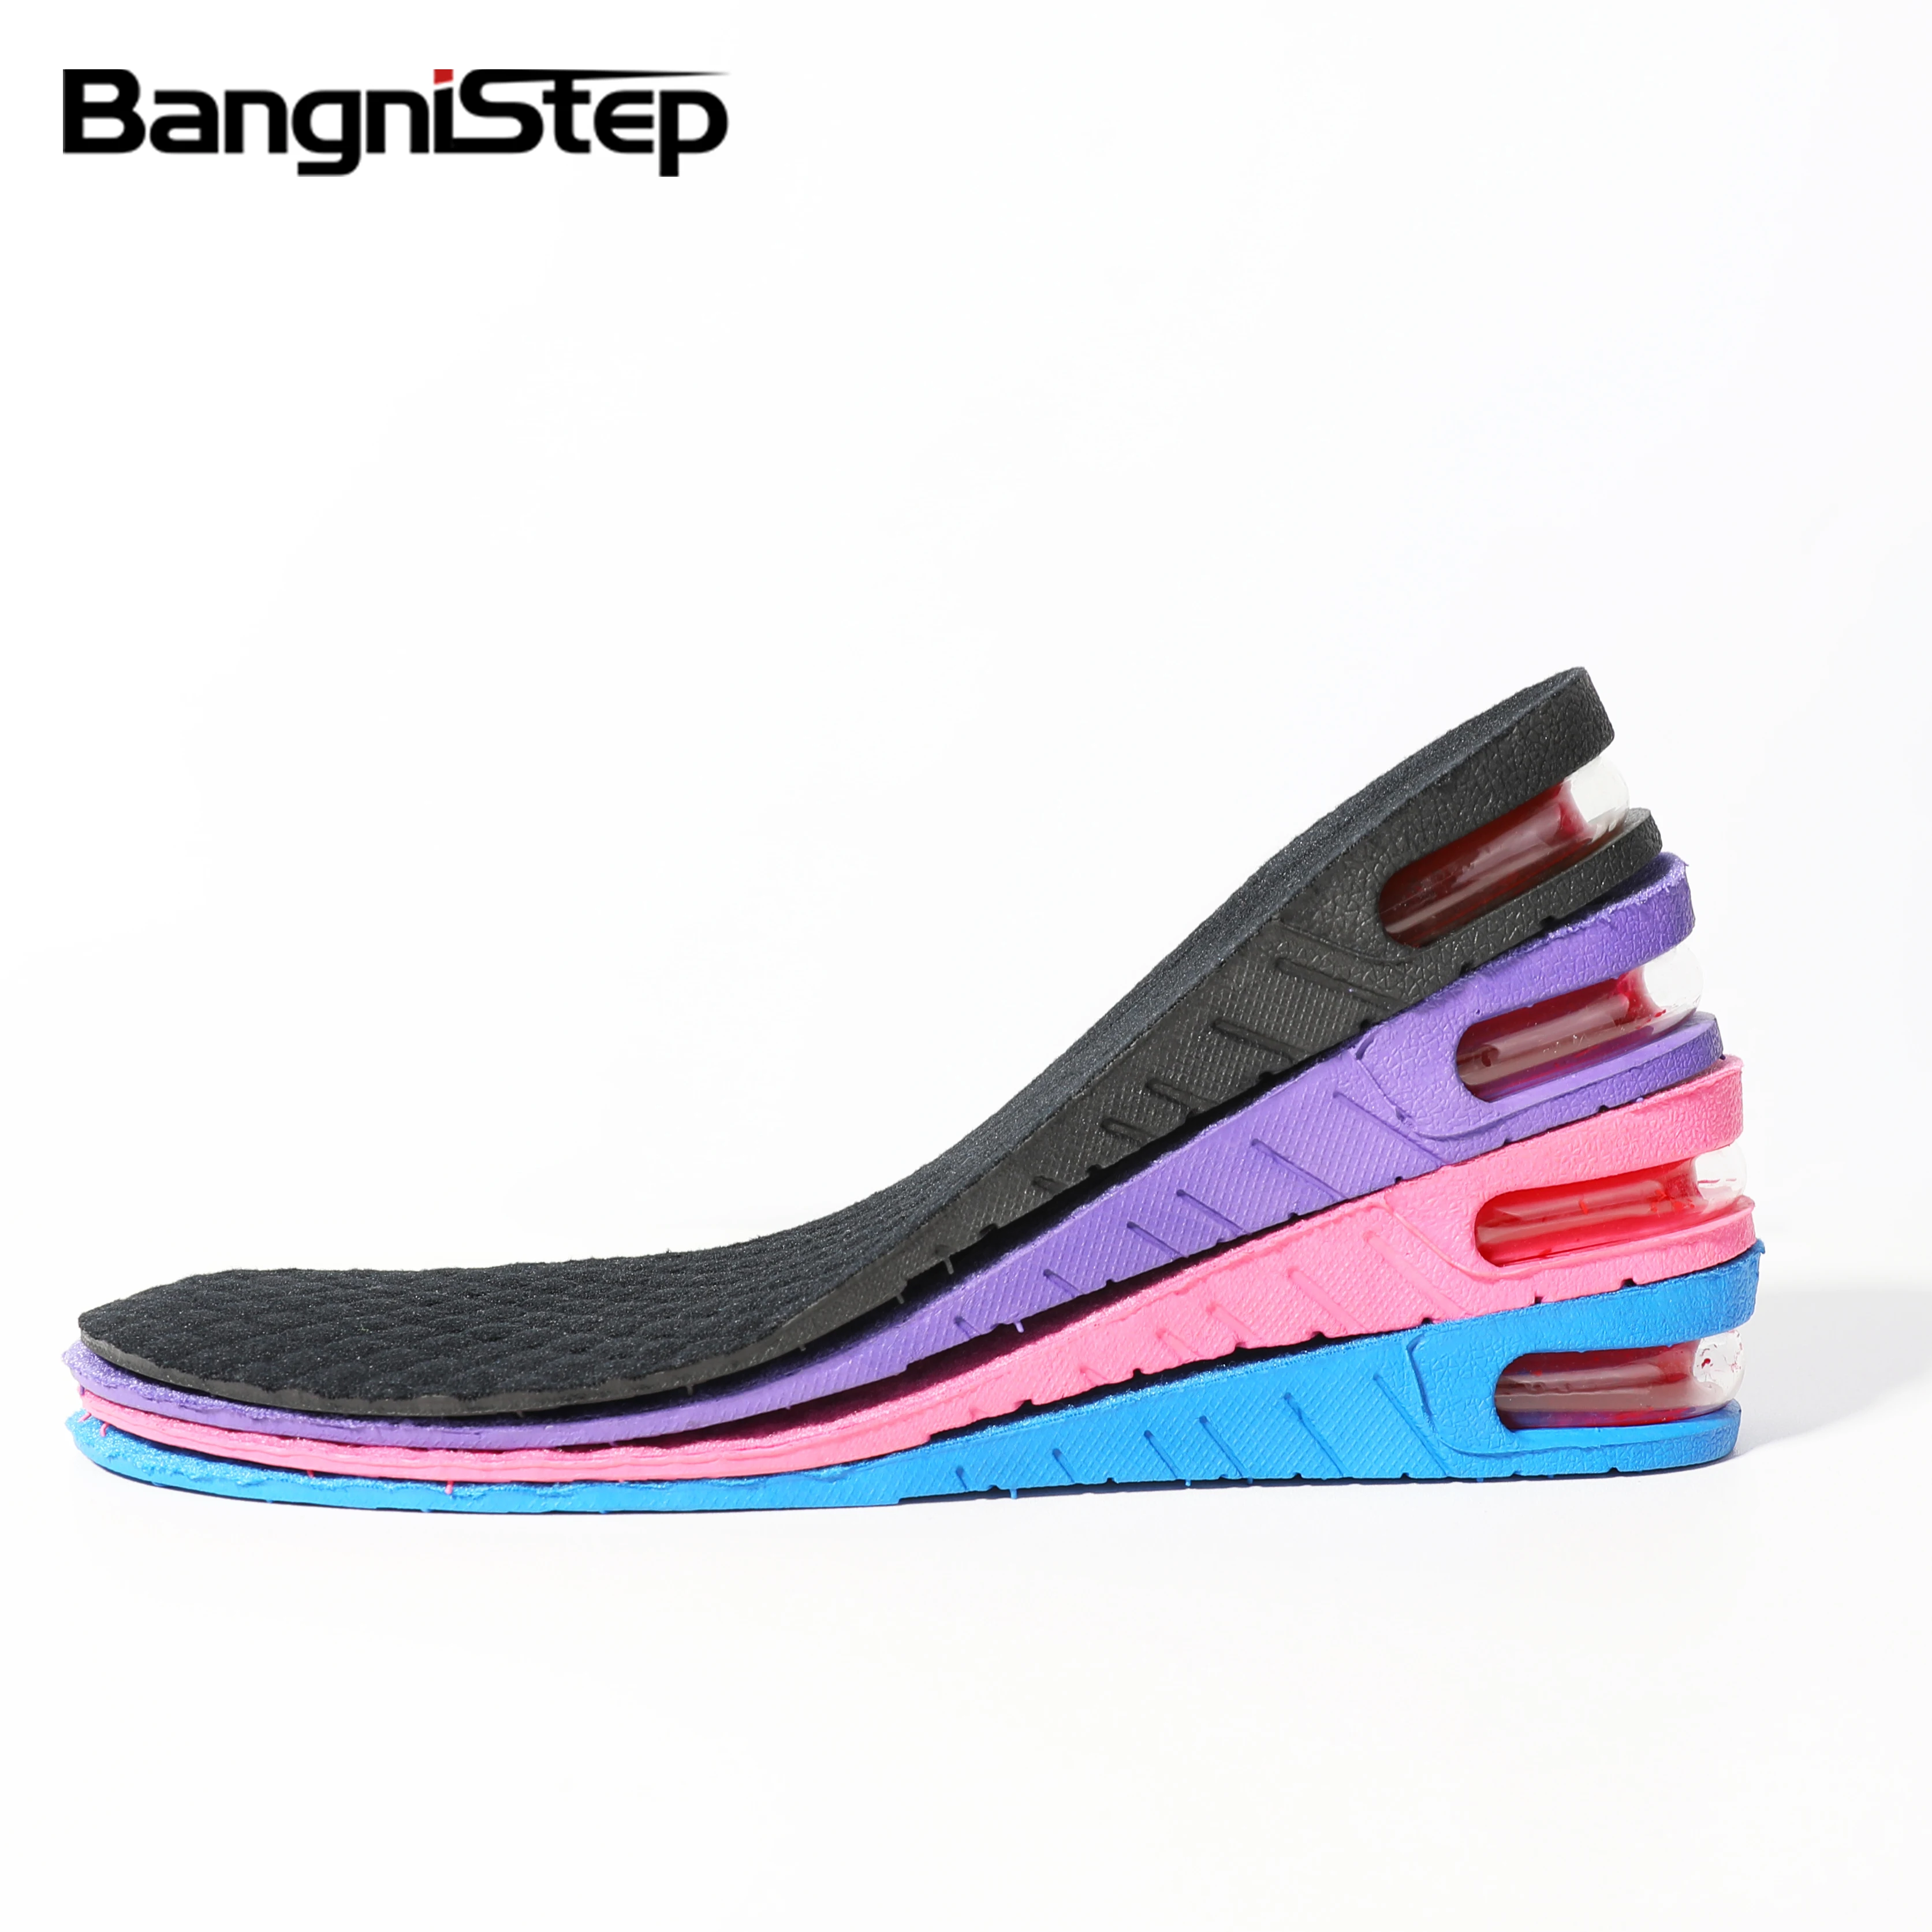 

Bangnistep Height Boosting Insoles Elevator Lifts Insole Cushion Insert Height Increase Insoles, Black purple pink blue